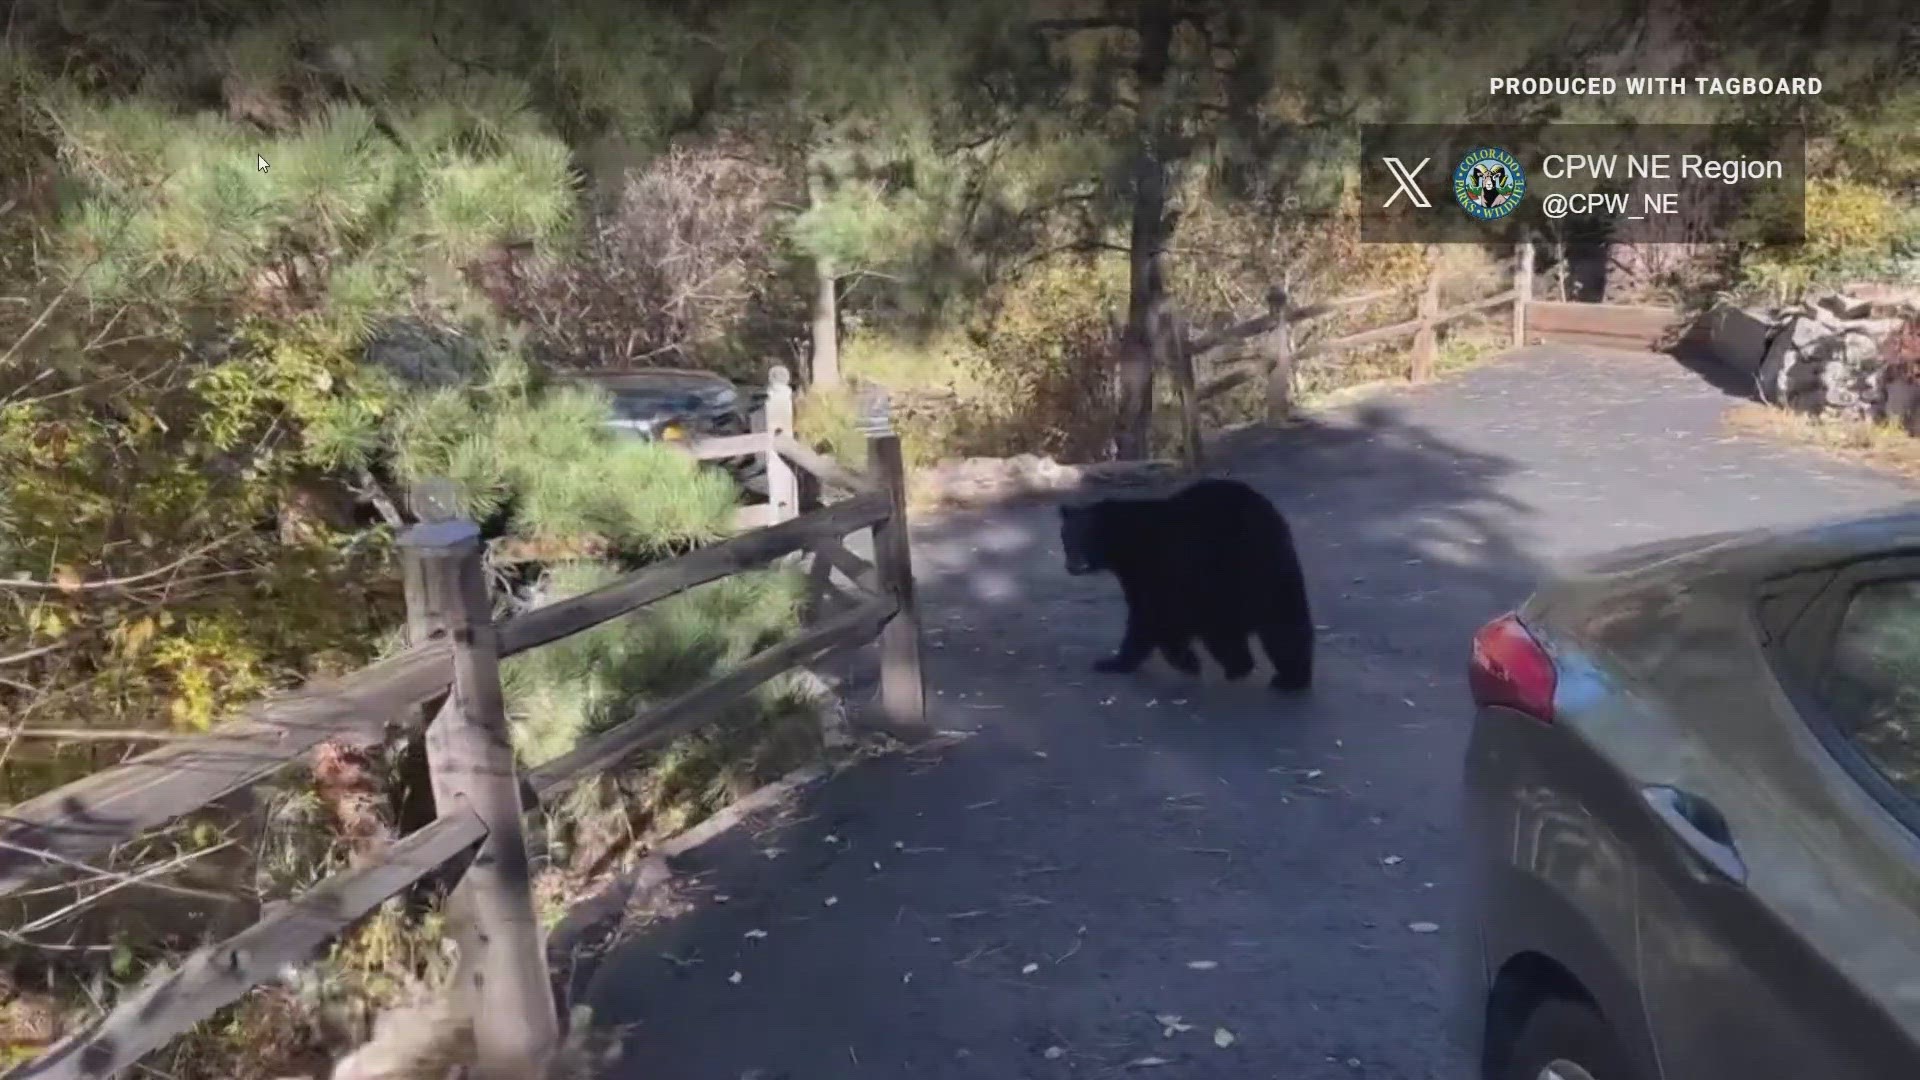 A black bear broke into a car in Jefferson County last month after the owner left peanut M&Ms inside, Colorado Parks and Wildlife said.